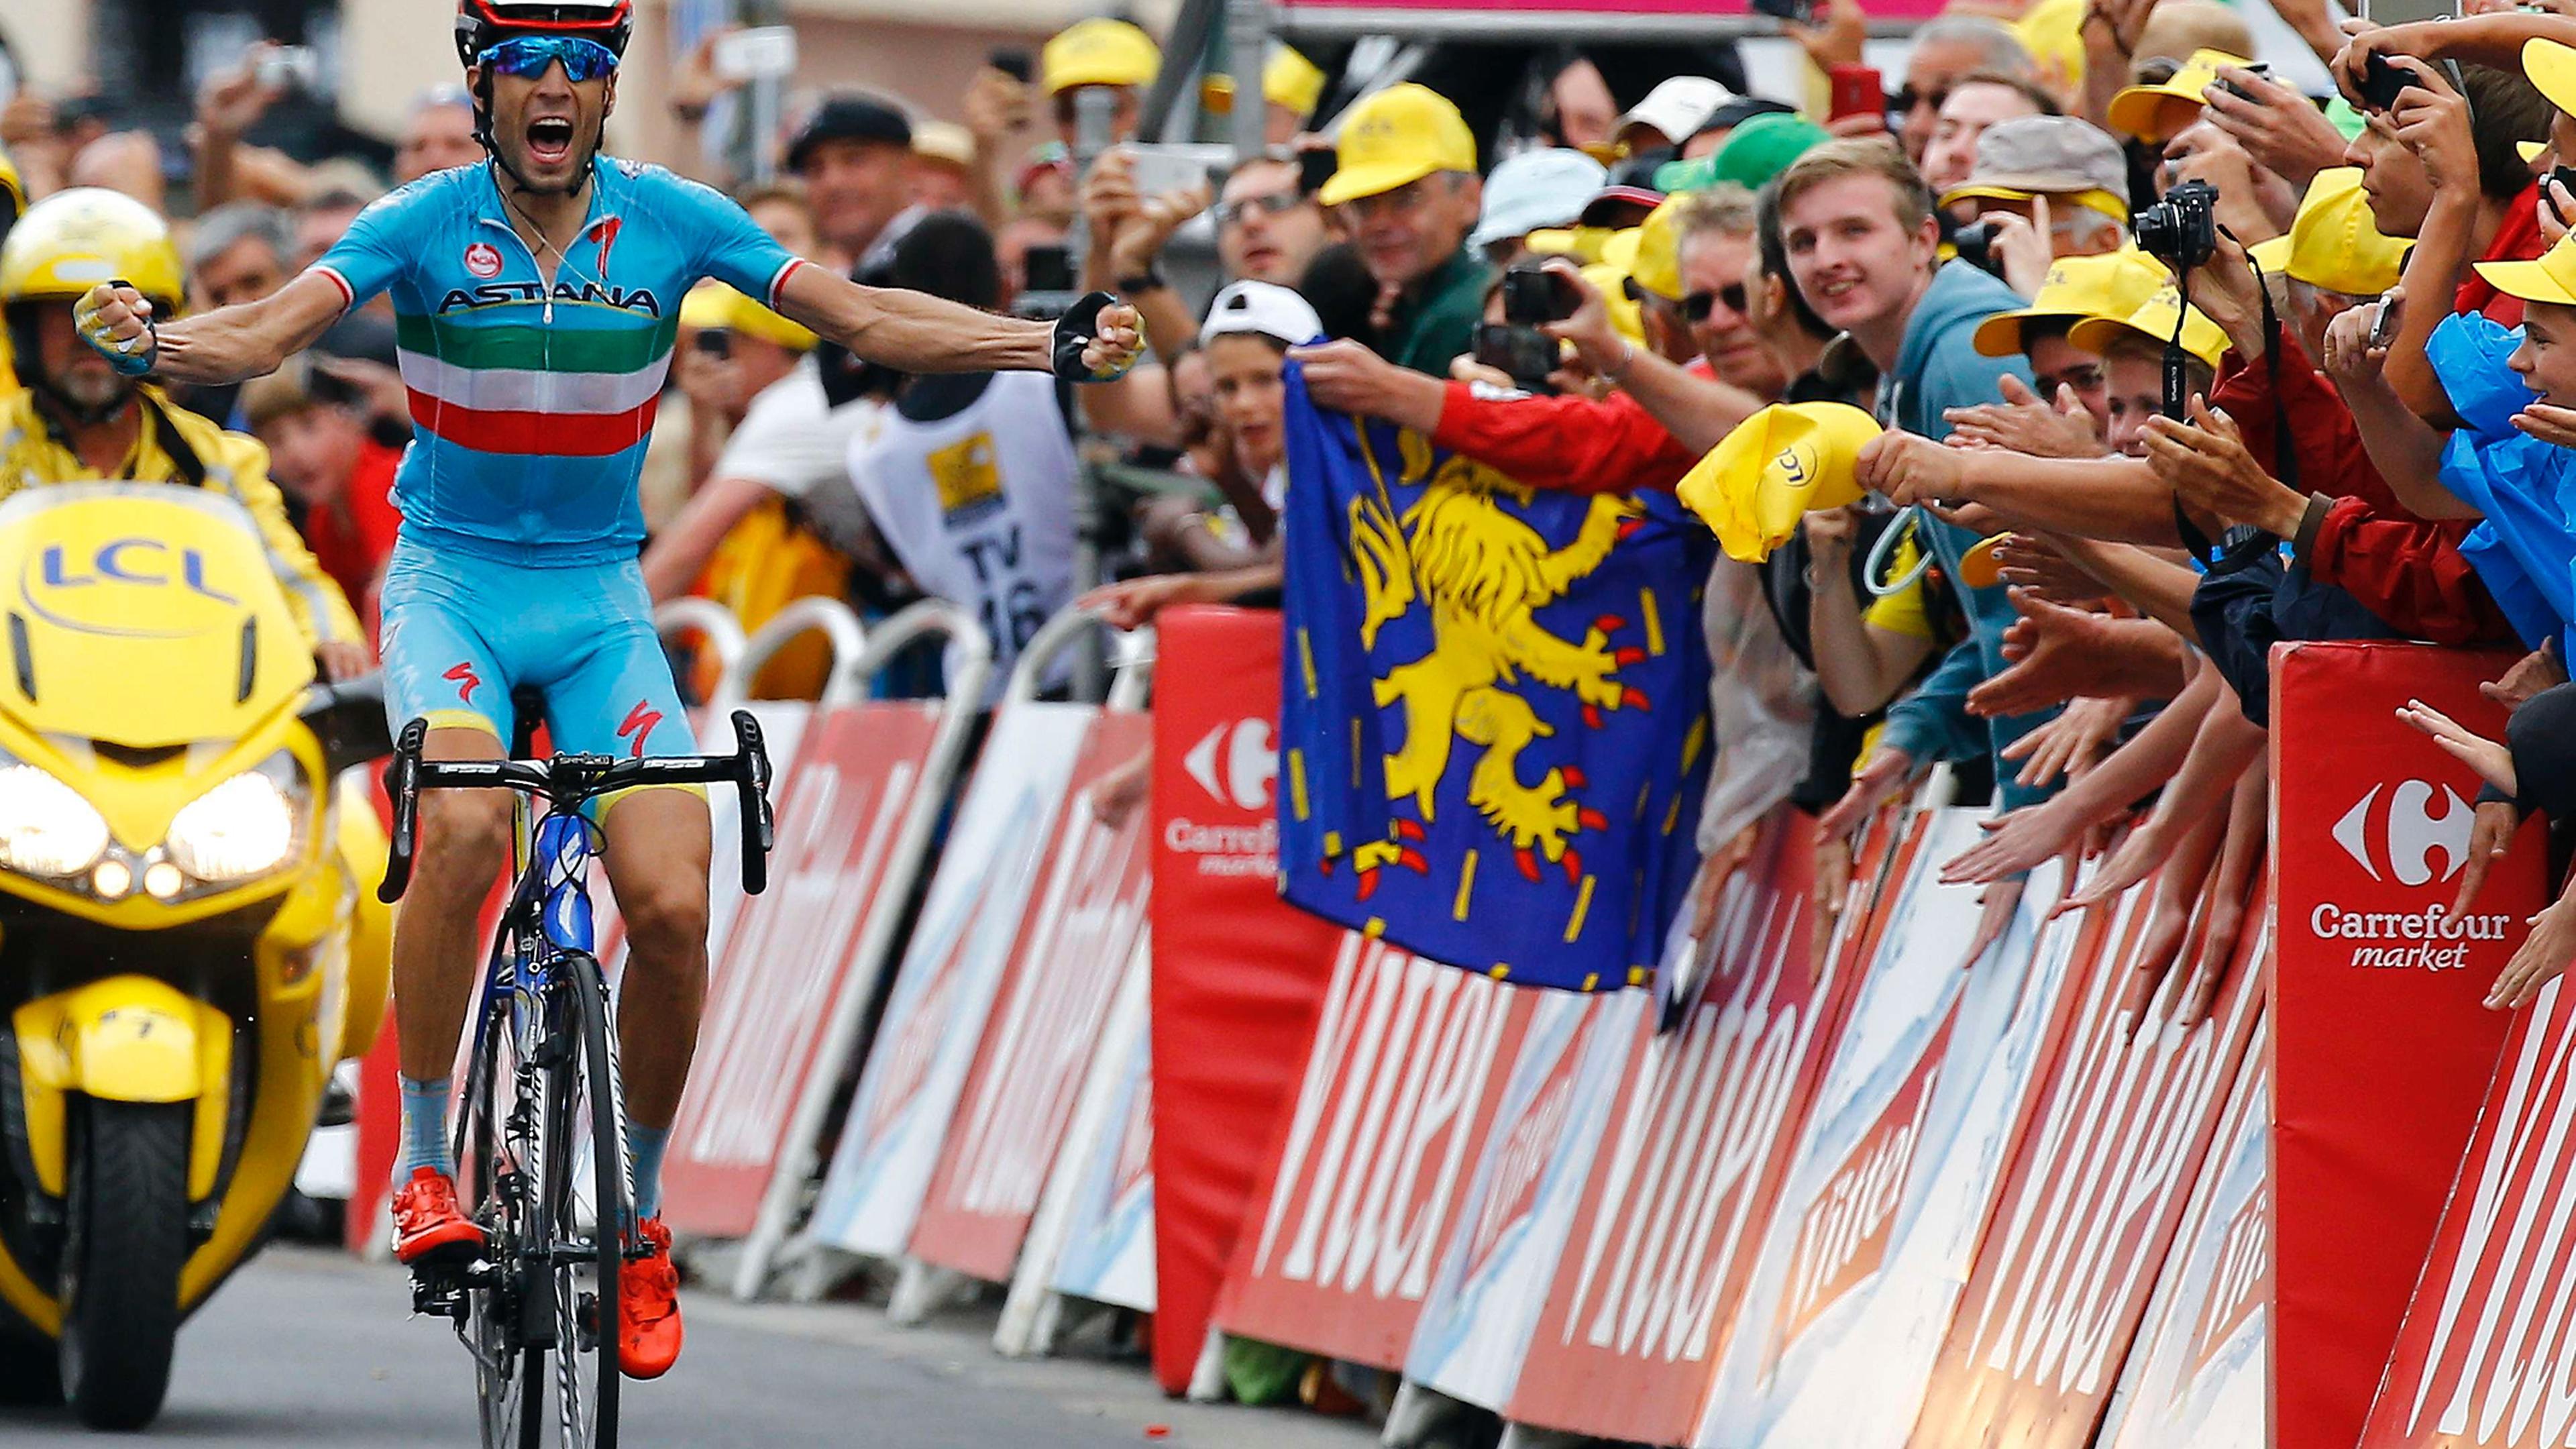 Astana rider Vincenzo Nibali of Italy celebrates as he crosses the finish line to win the 138-km (85.74 miles) 19th stage of the 102nd Tour de France cycling race from Saint-Jean-de-Maurienne to La Toussuire-Les Sybelles in the French Alps mountains, France, July 24, 2015. REUTERS/Stefano Rellandini  TPX IMAGES OF THE DAY